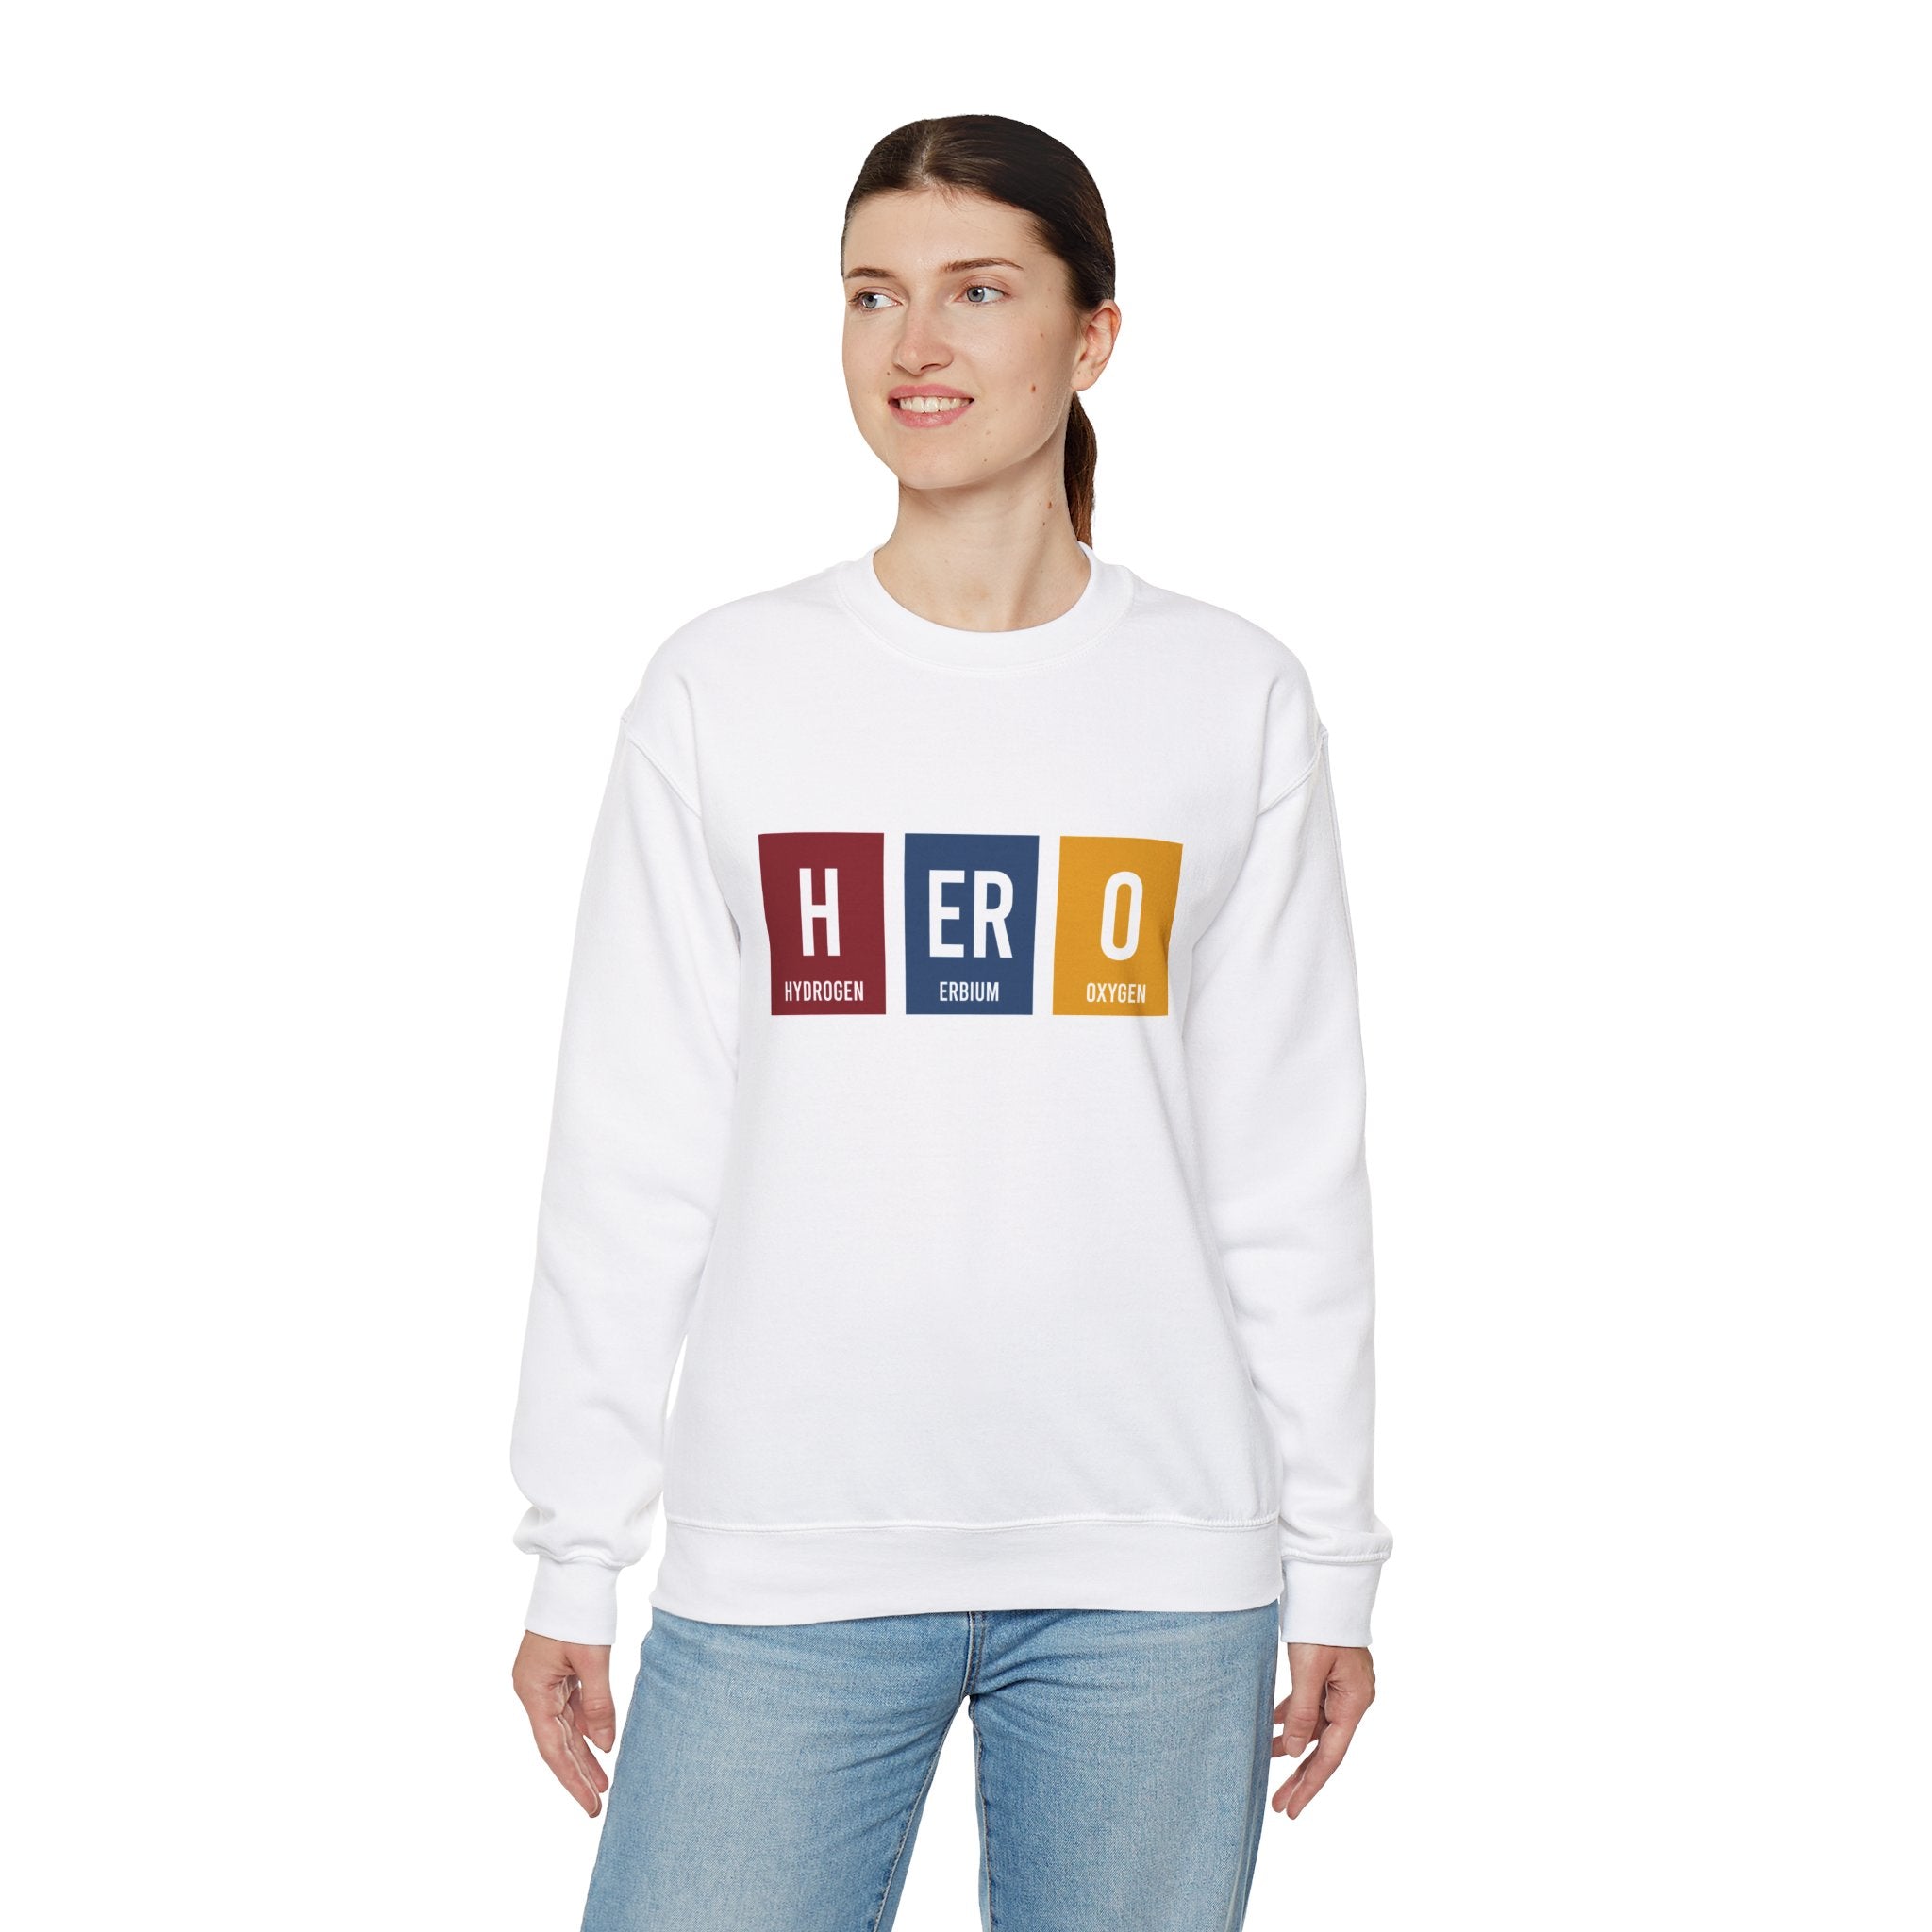 A person wearing a HERO - Sweatshirt designed sweatshirt featuring the text "HERO" spelled using periodic table elements: Hydrogen (H), Erbium (Er), and Oxygen (O). The comfortable sweatshirt blends warmth and style, perfect for making winters warmer. They have a neutral facial expression.